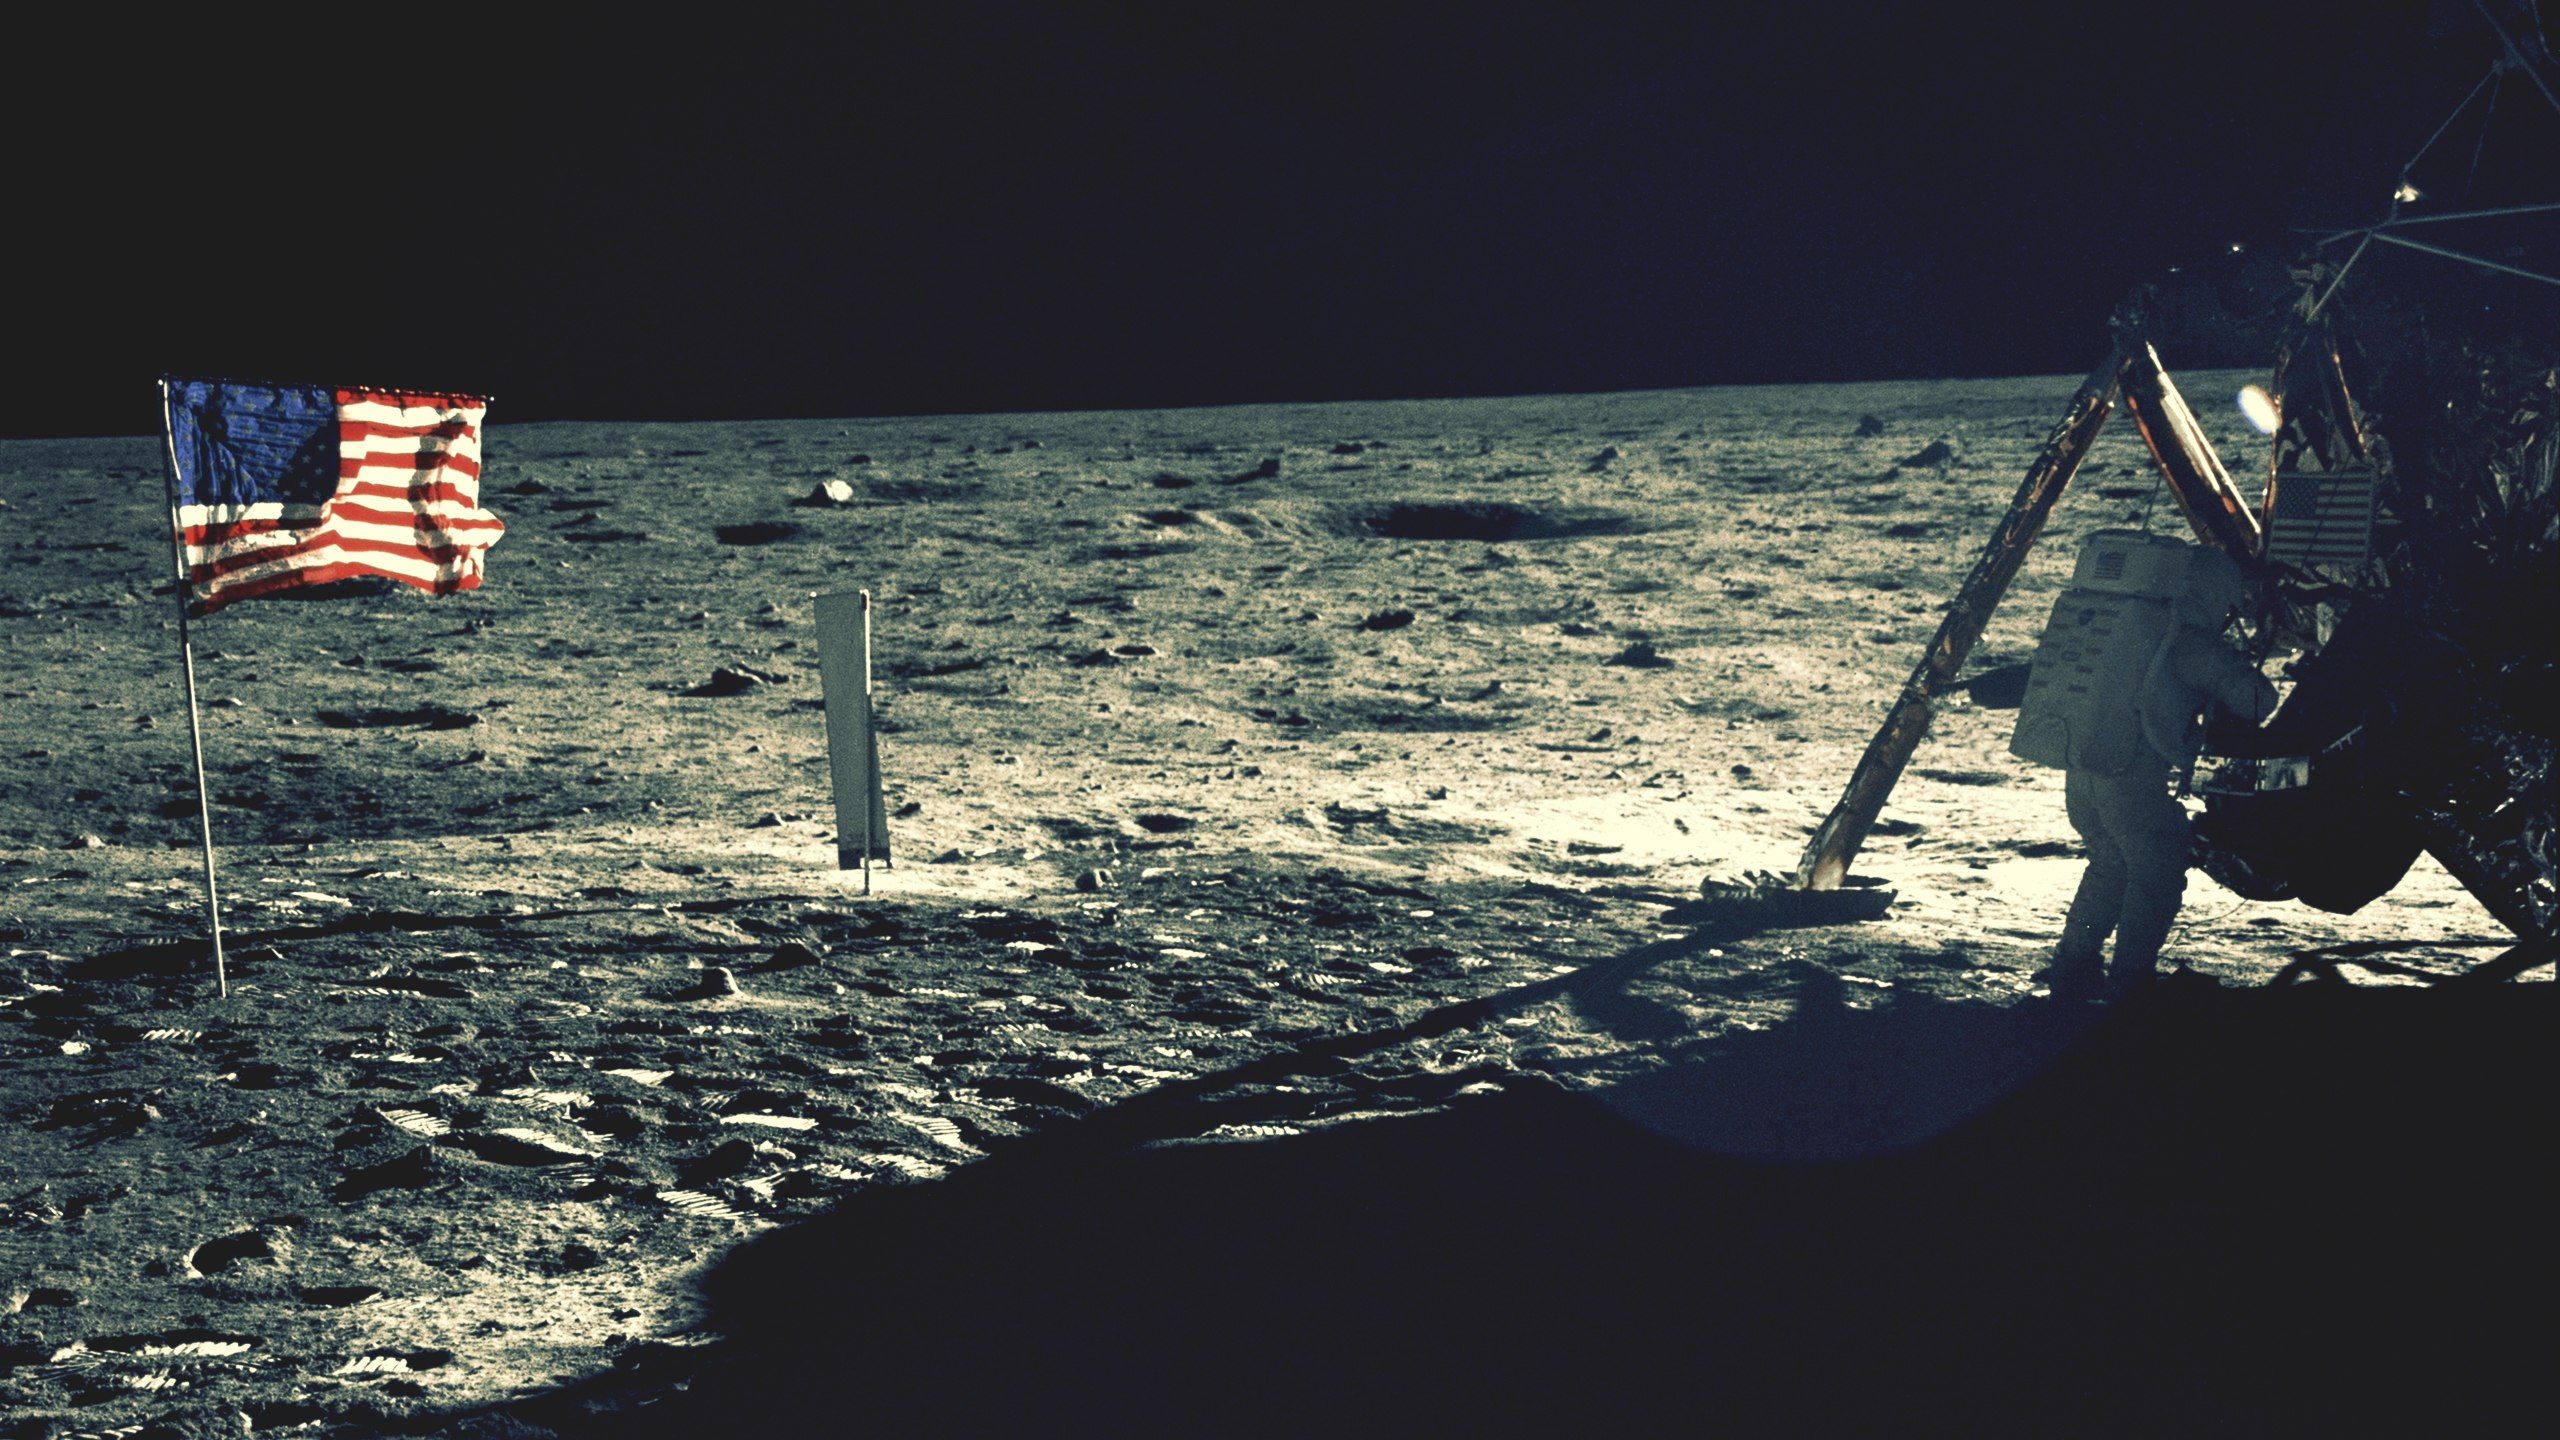 Moon landing wallpaper 2560x1440 - (#45189) - High Quality and ...